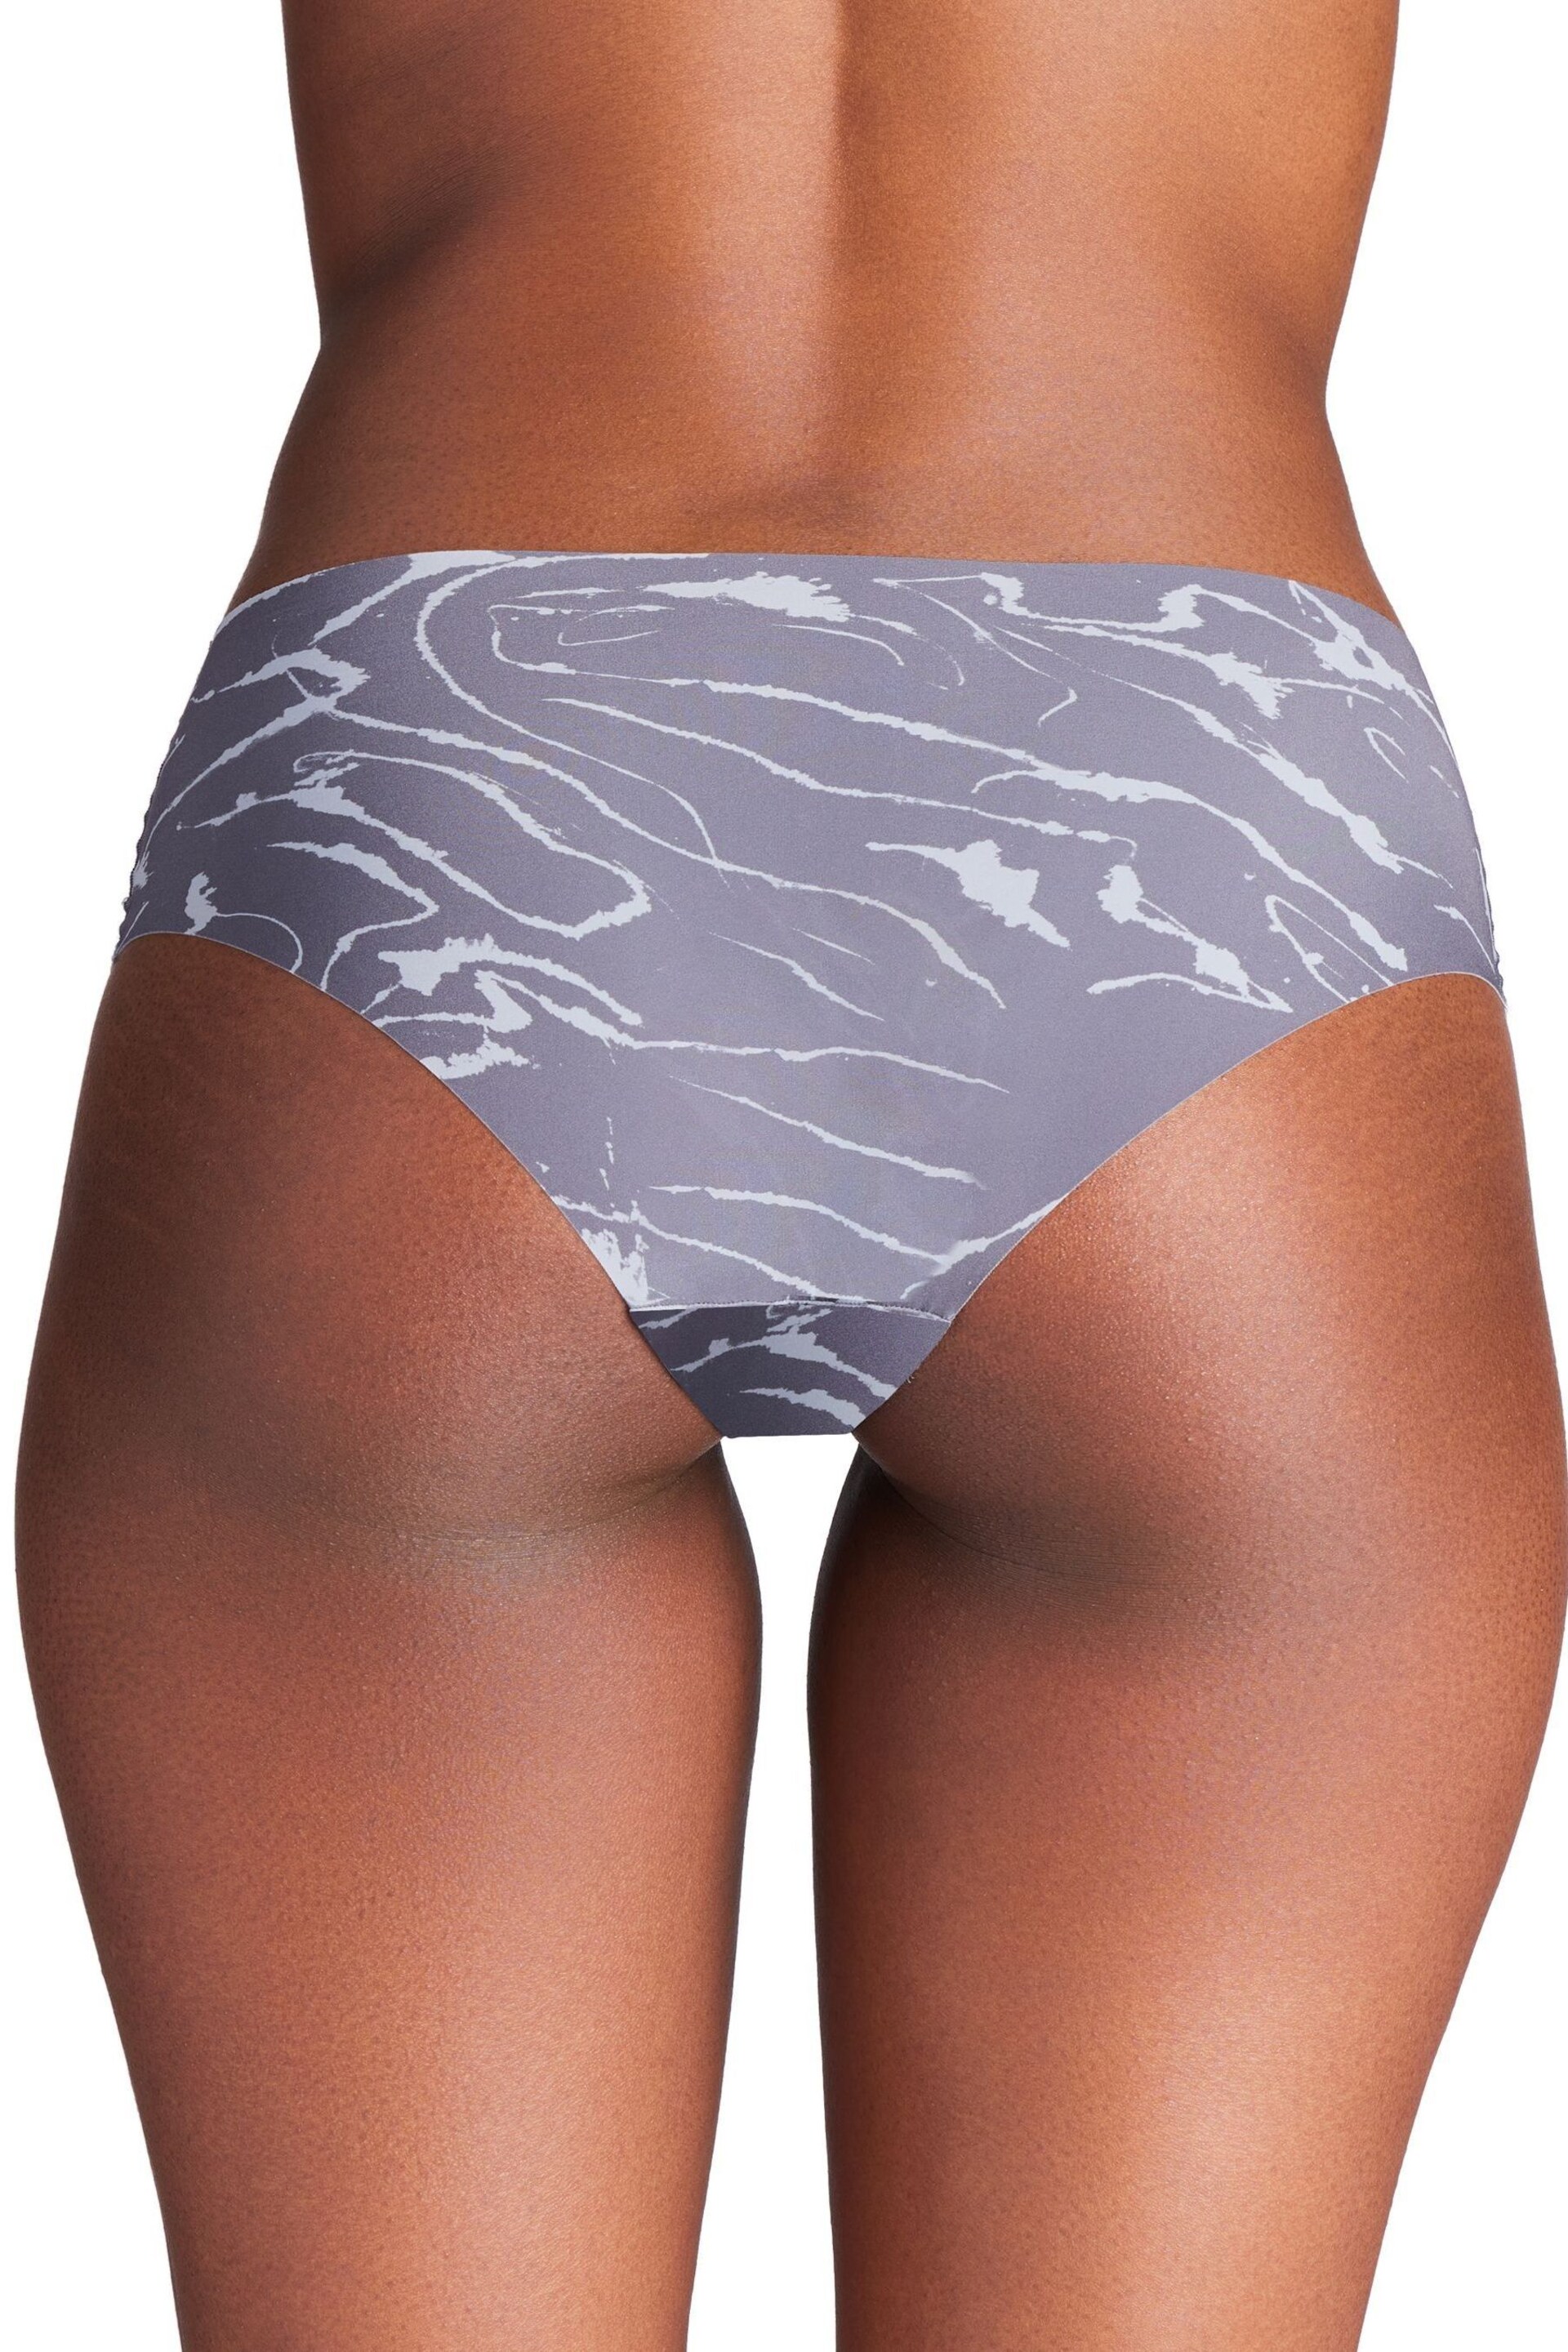 Under Armour Pink/Grey No Show Pure Stretch Hipster Printed Knickers 3 Pack - Image 3 of 6